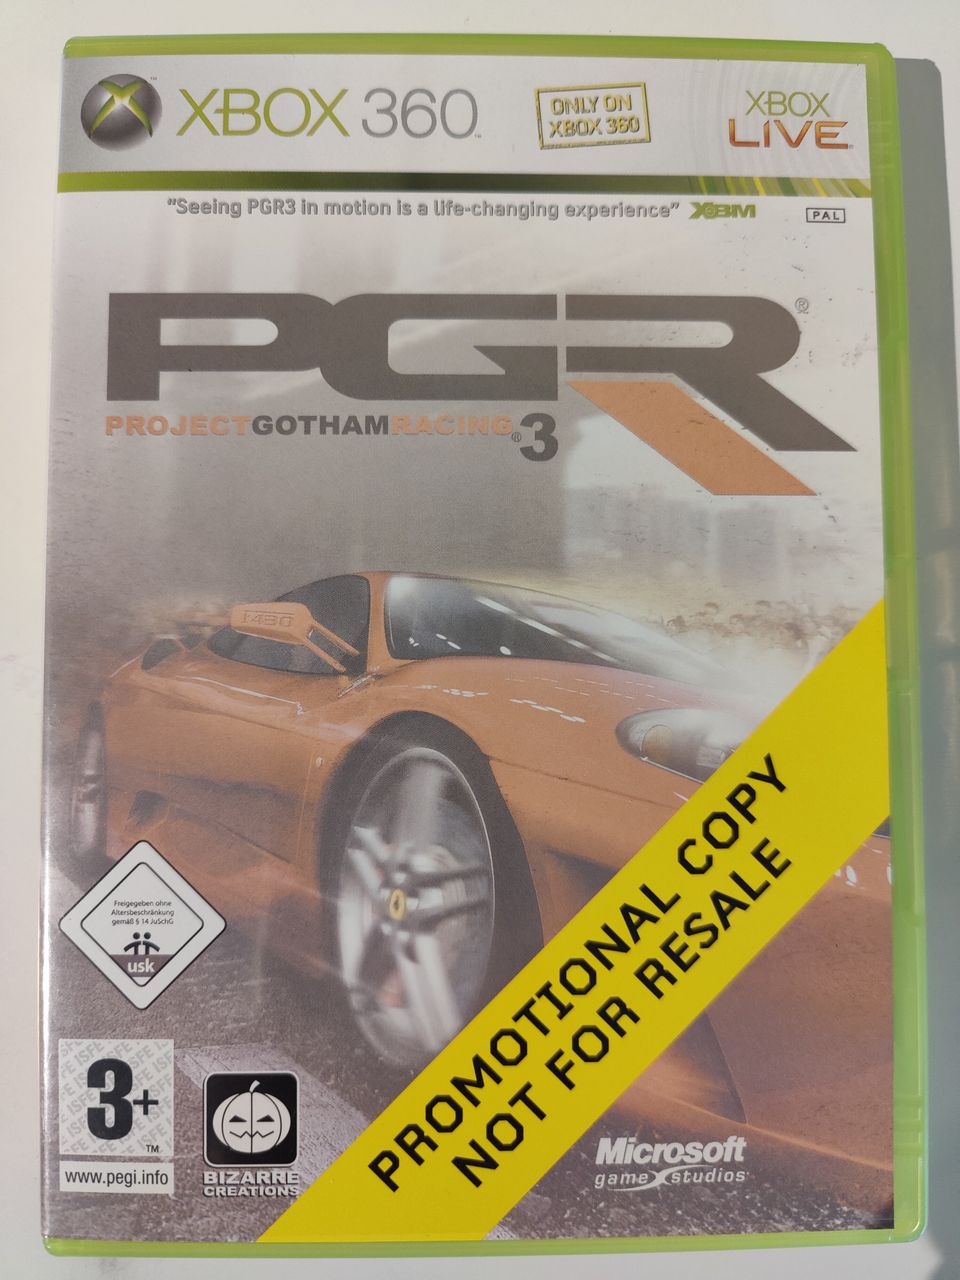 Xbox 360 Project Gotham Racing 3 (Promotion)